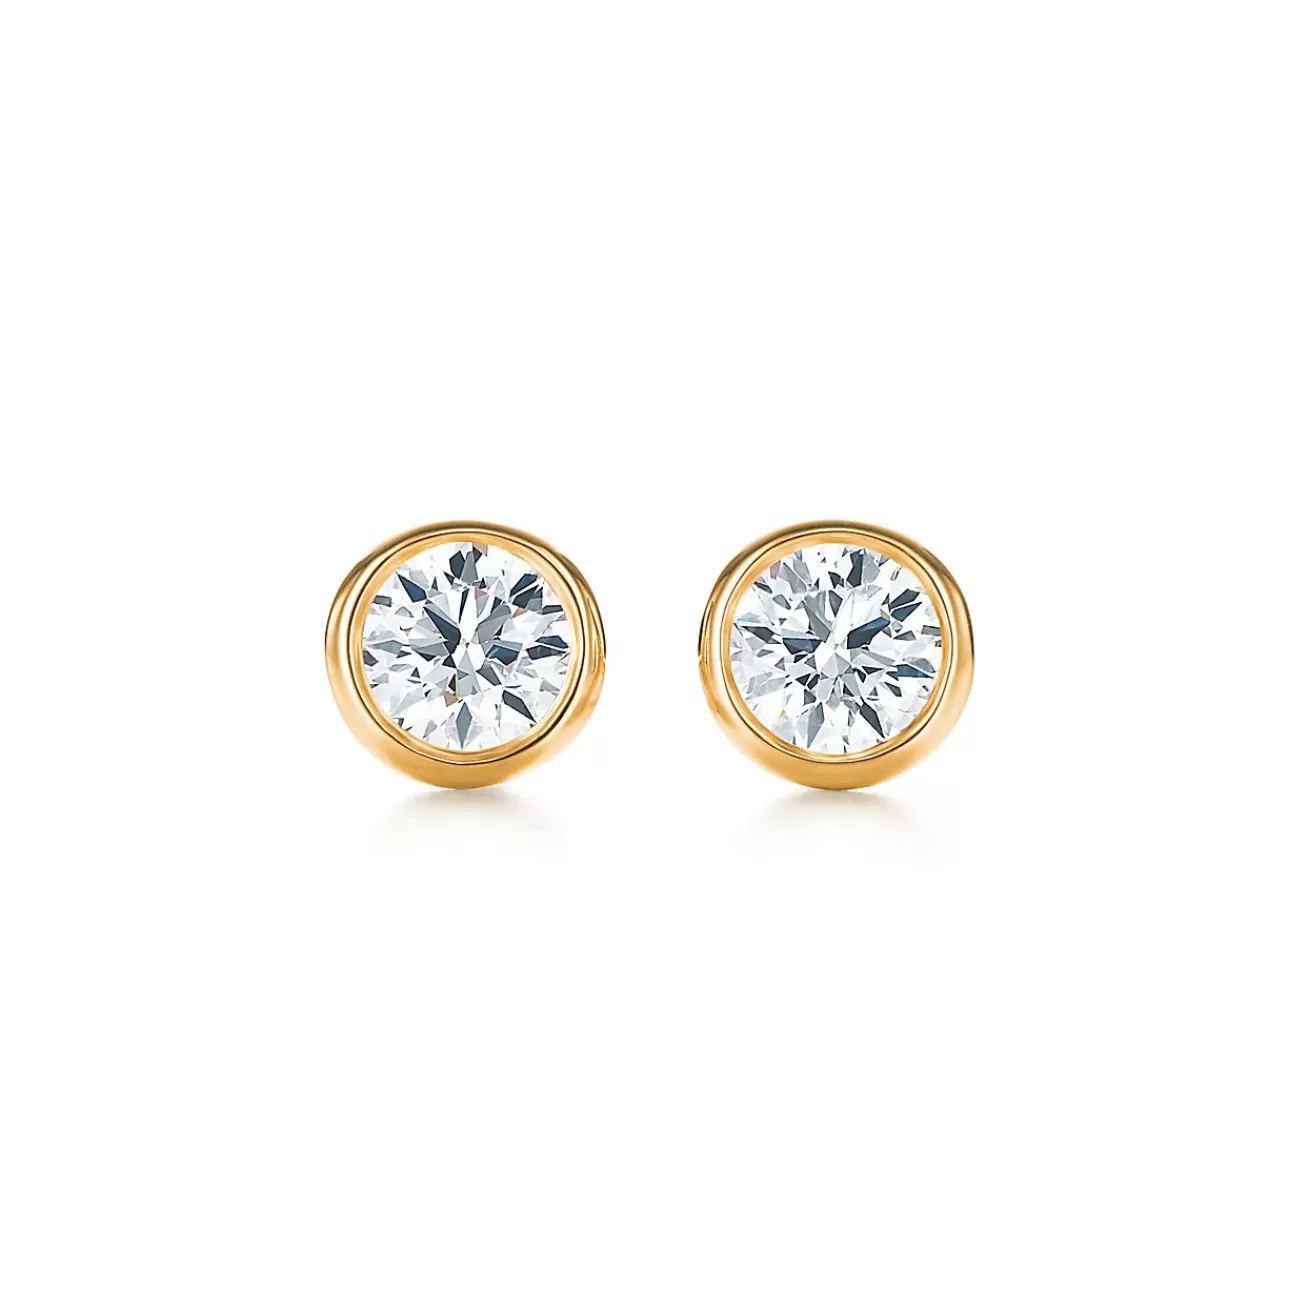 Tiffany & Co. Elsa Peretti® Diamonds by the Yard® Earrings in Yellow Gold | ^ Earrings | Gifts for Her